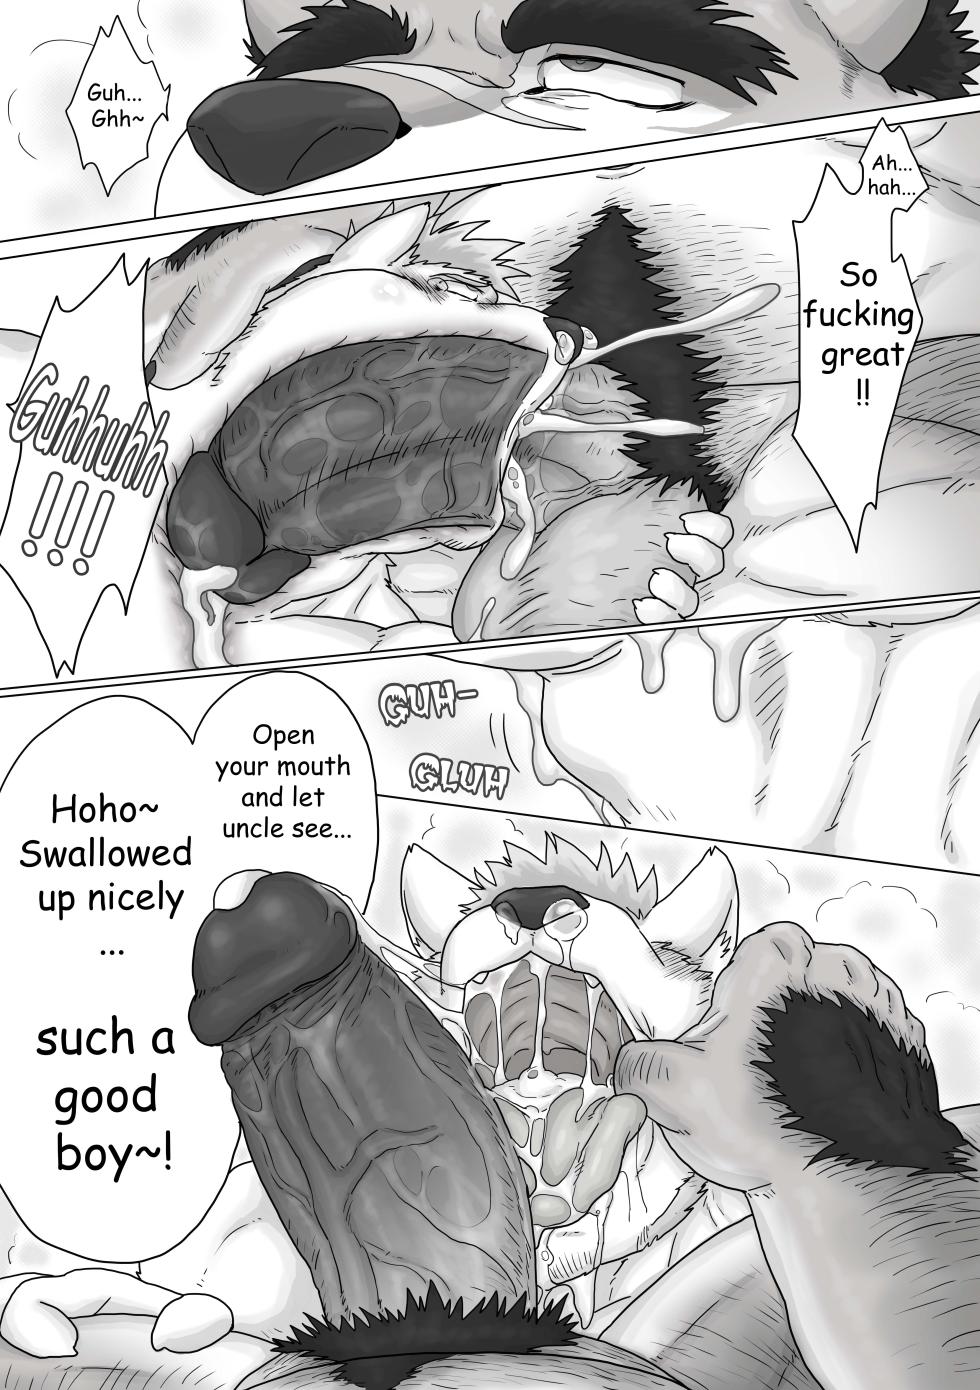 [Renoky] Jikka no Ossan wa Daisukebe!! | My hometown‘s uncle is a Horny Hung!! [English] [Decensored] [Digital] - Page 22